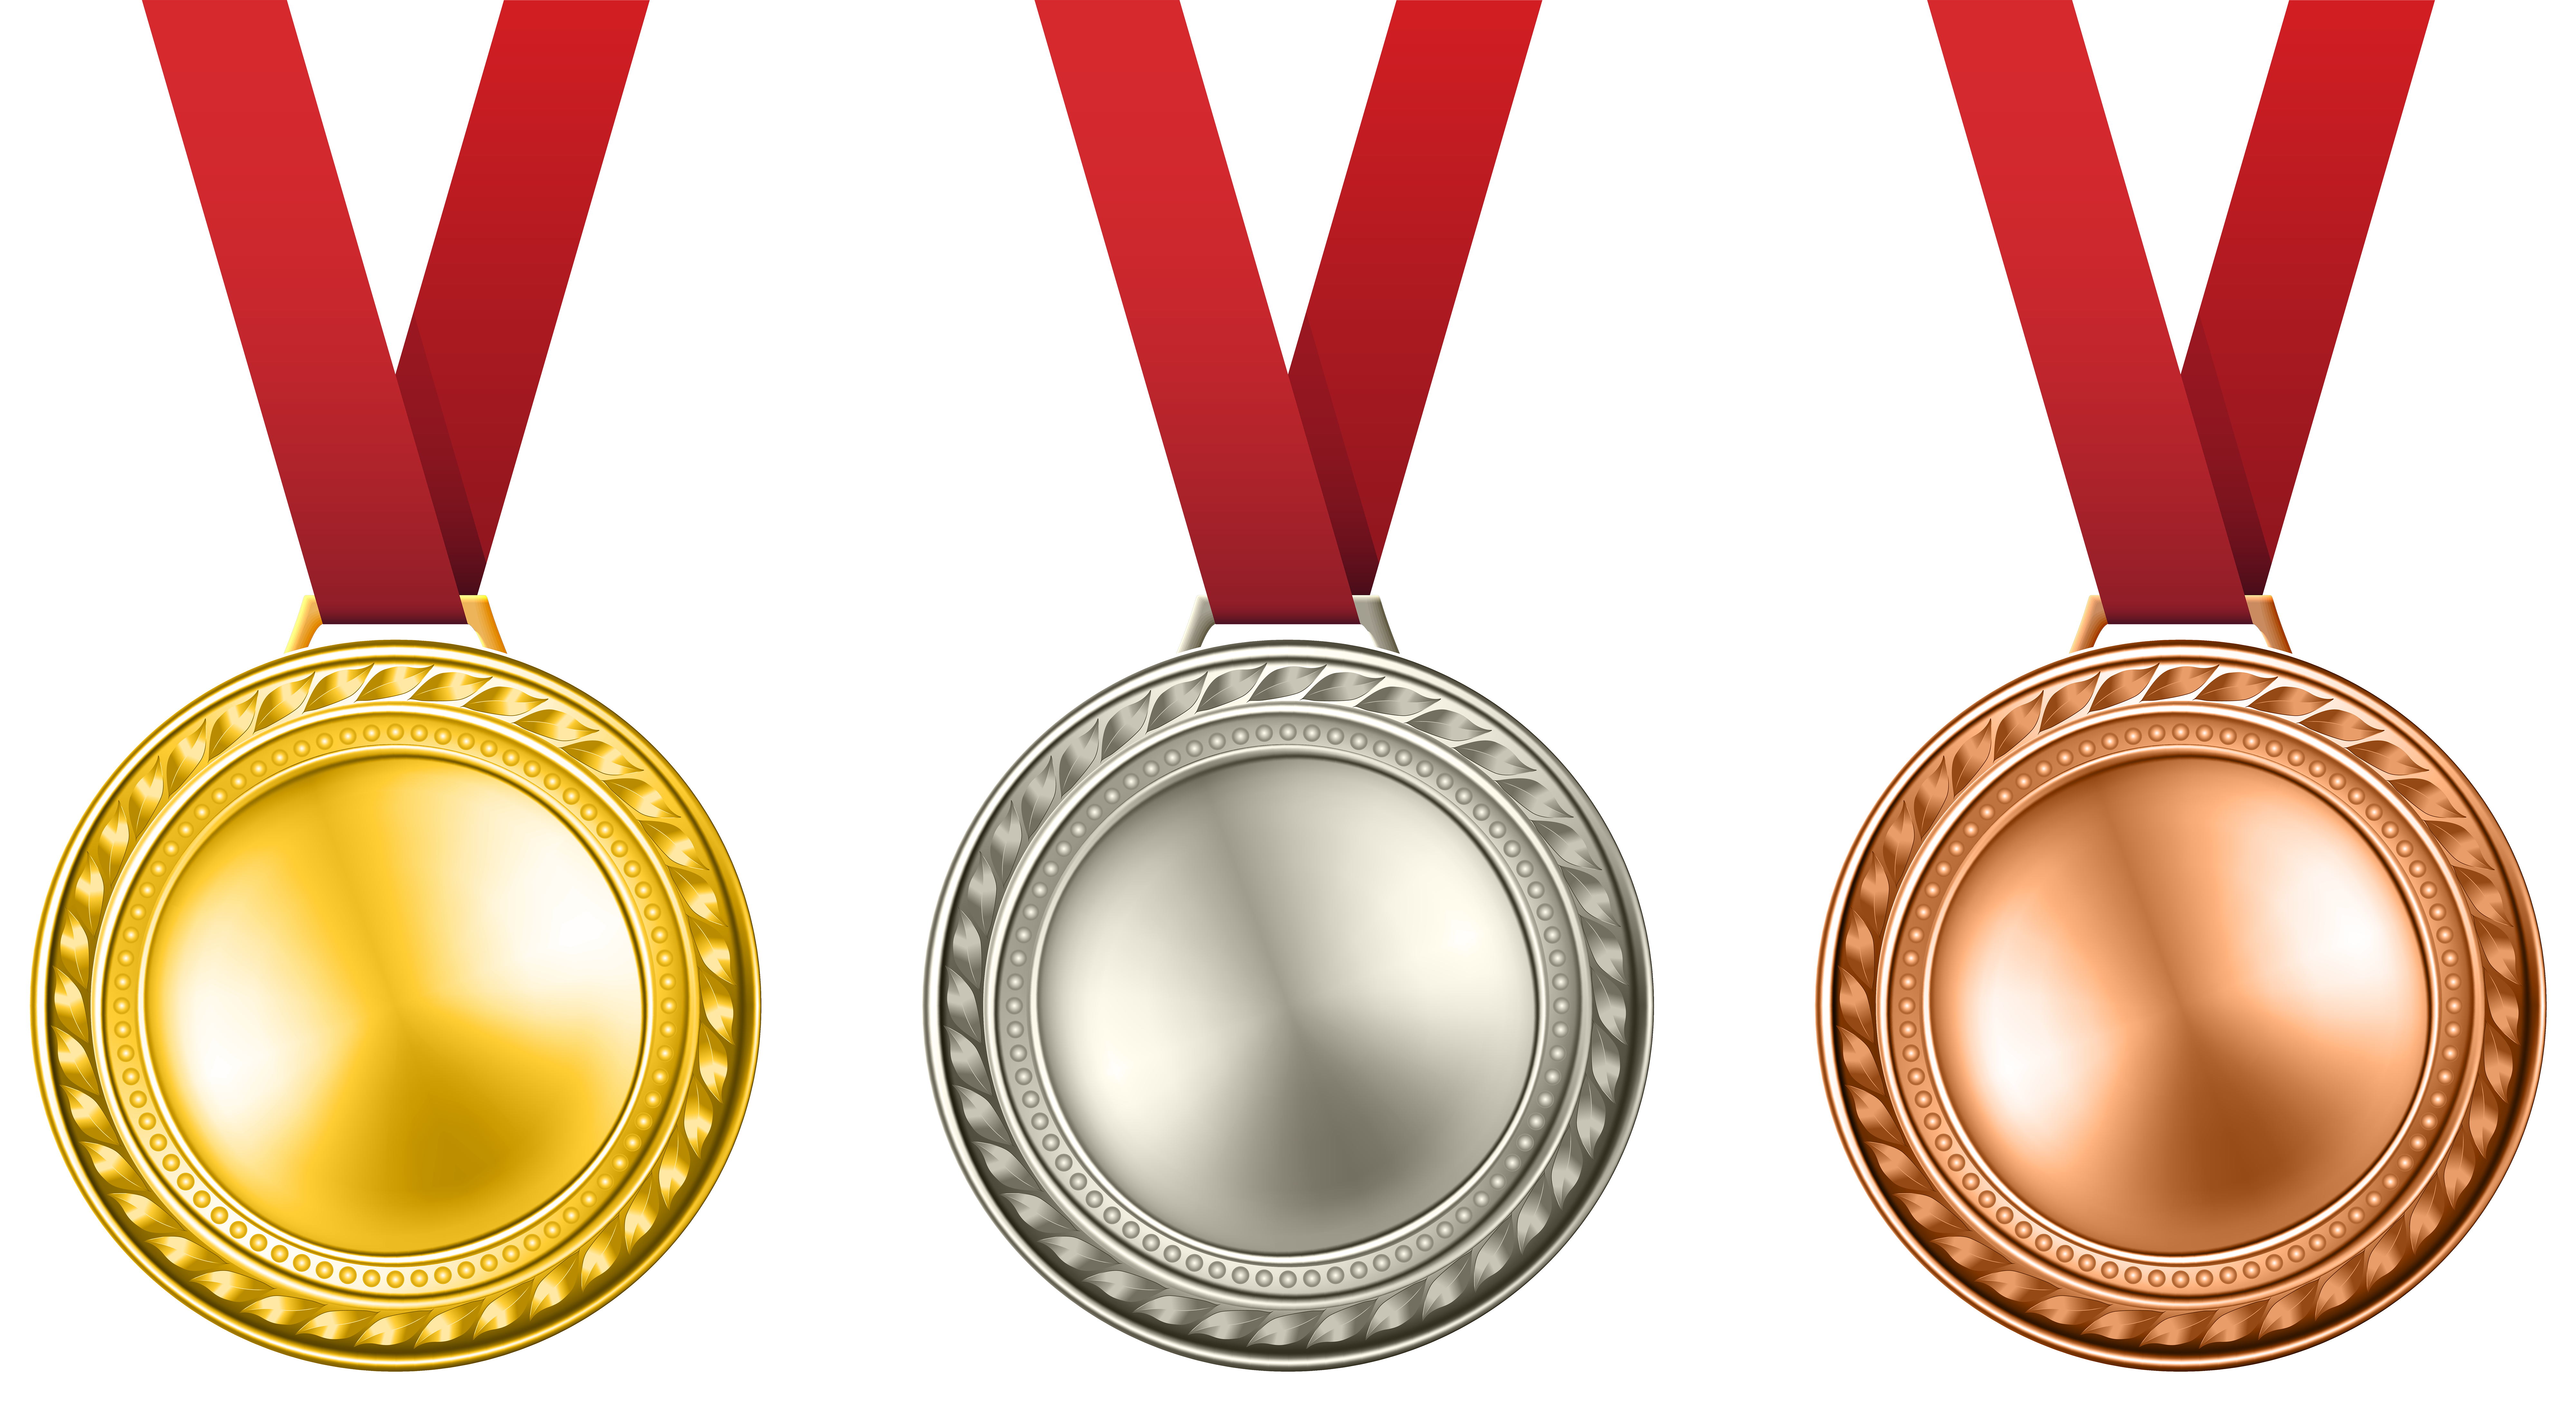 Olympic Medals Clipart Olympic Medals Png Gold Clip Art Awards Images